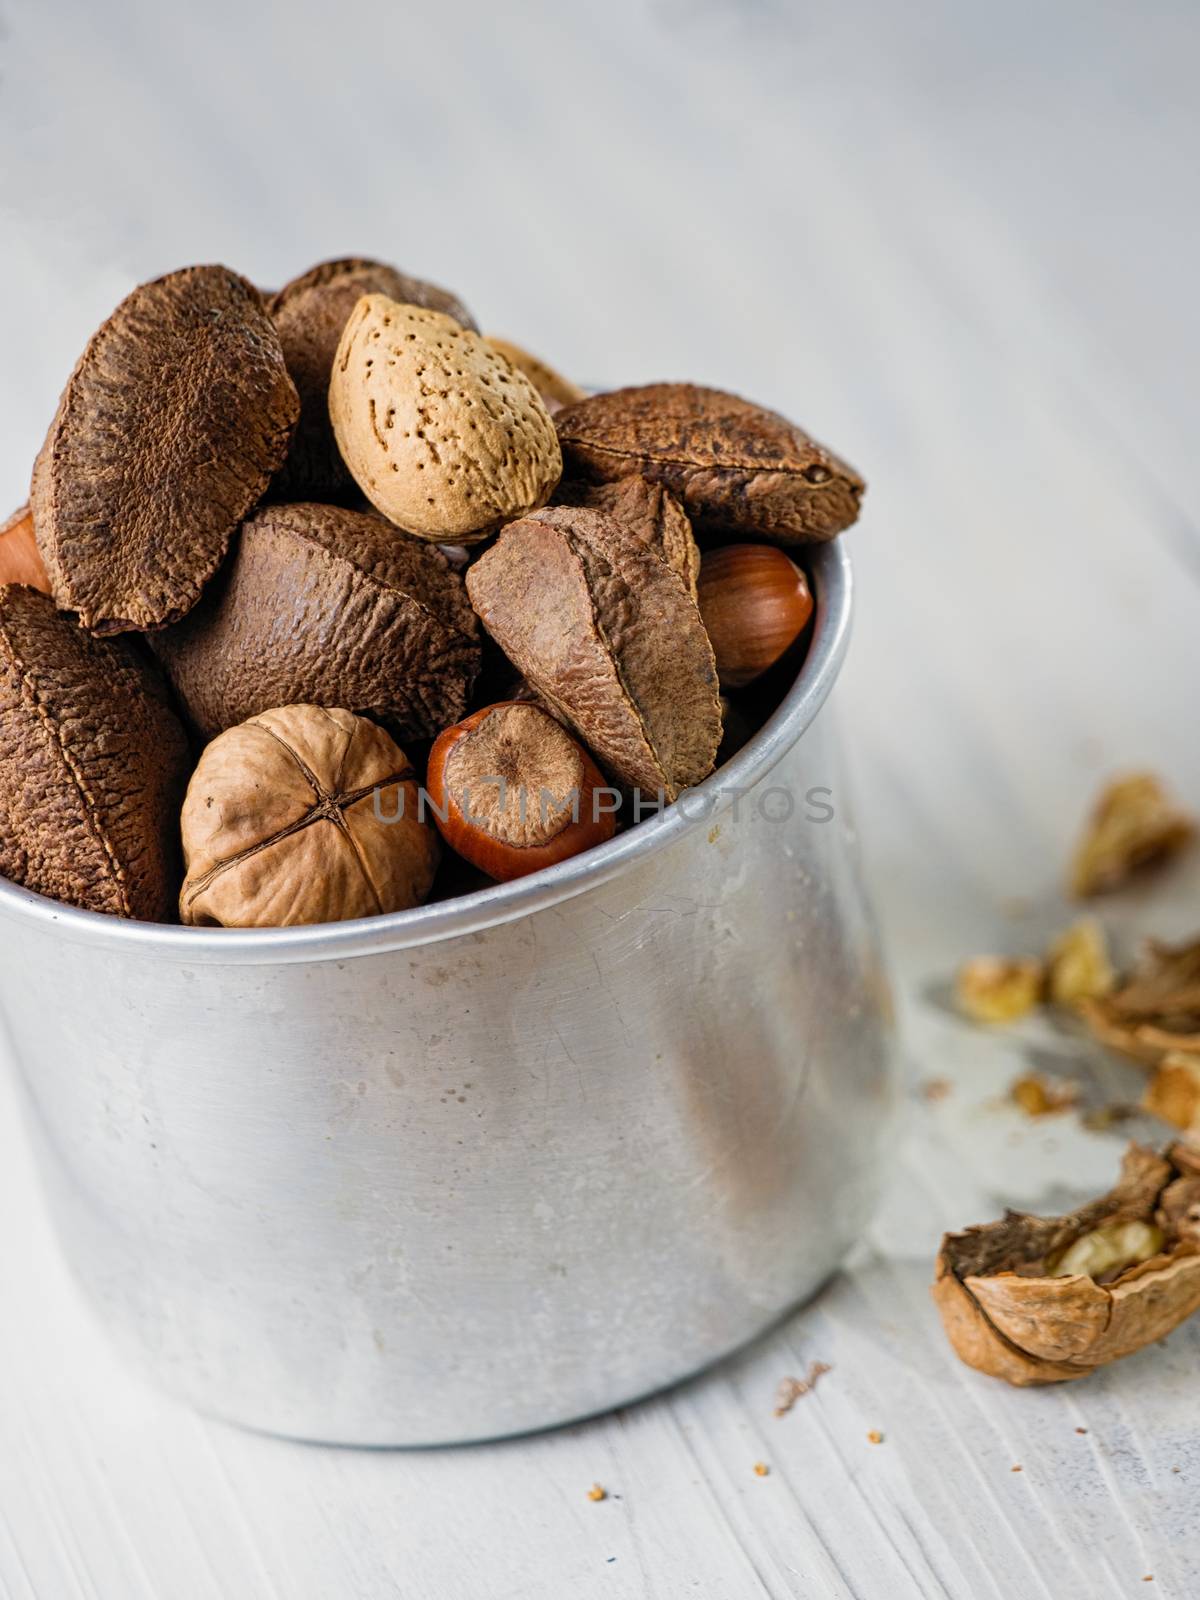 assorted mixed nuts snack by zkruger